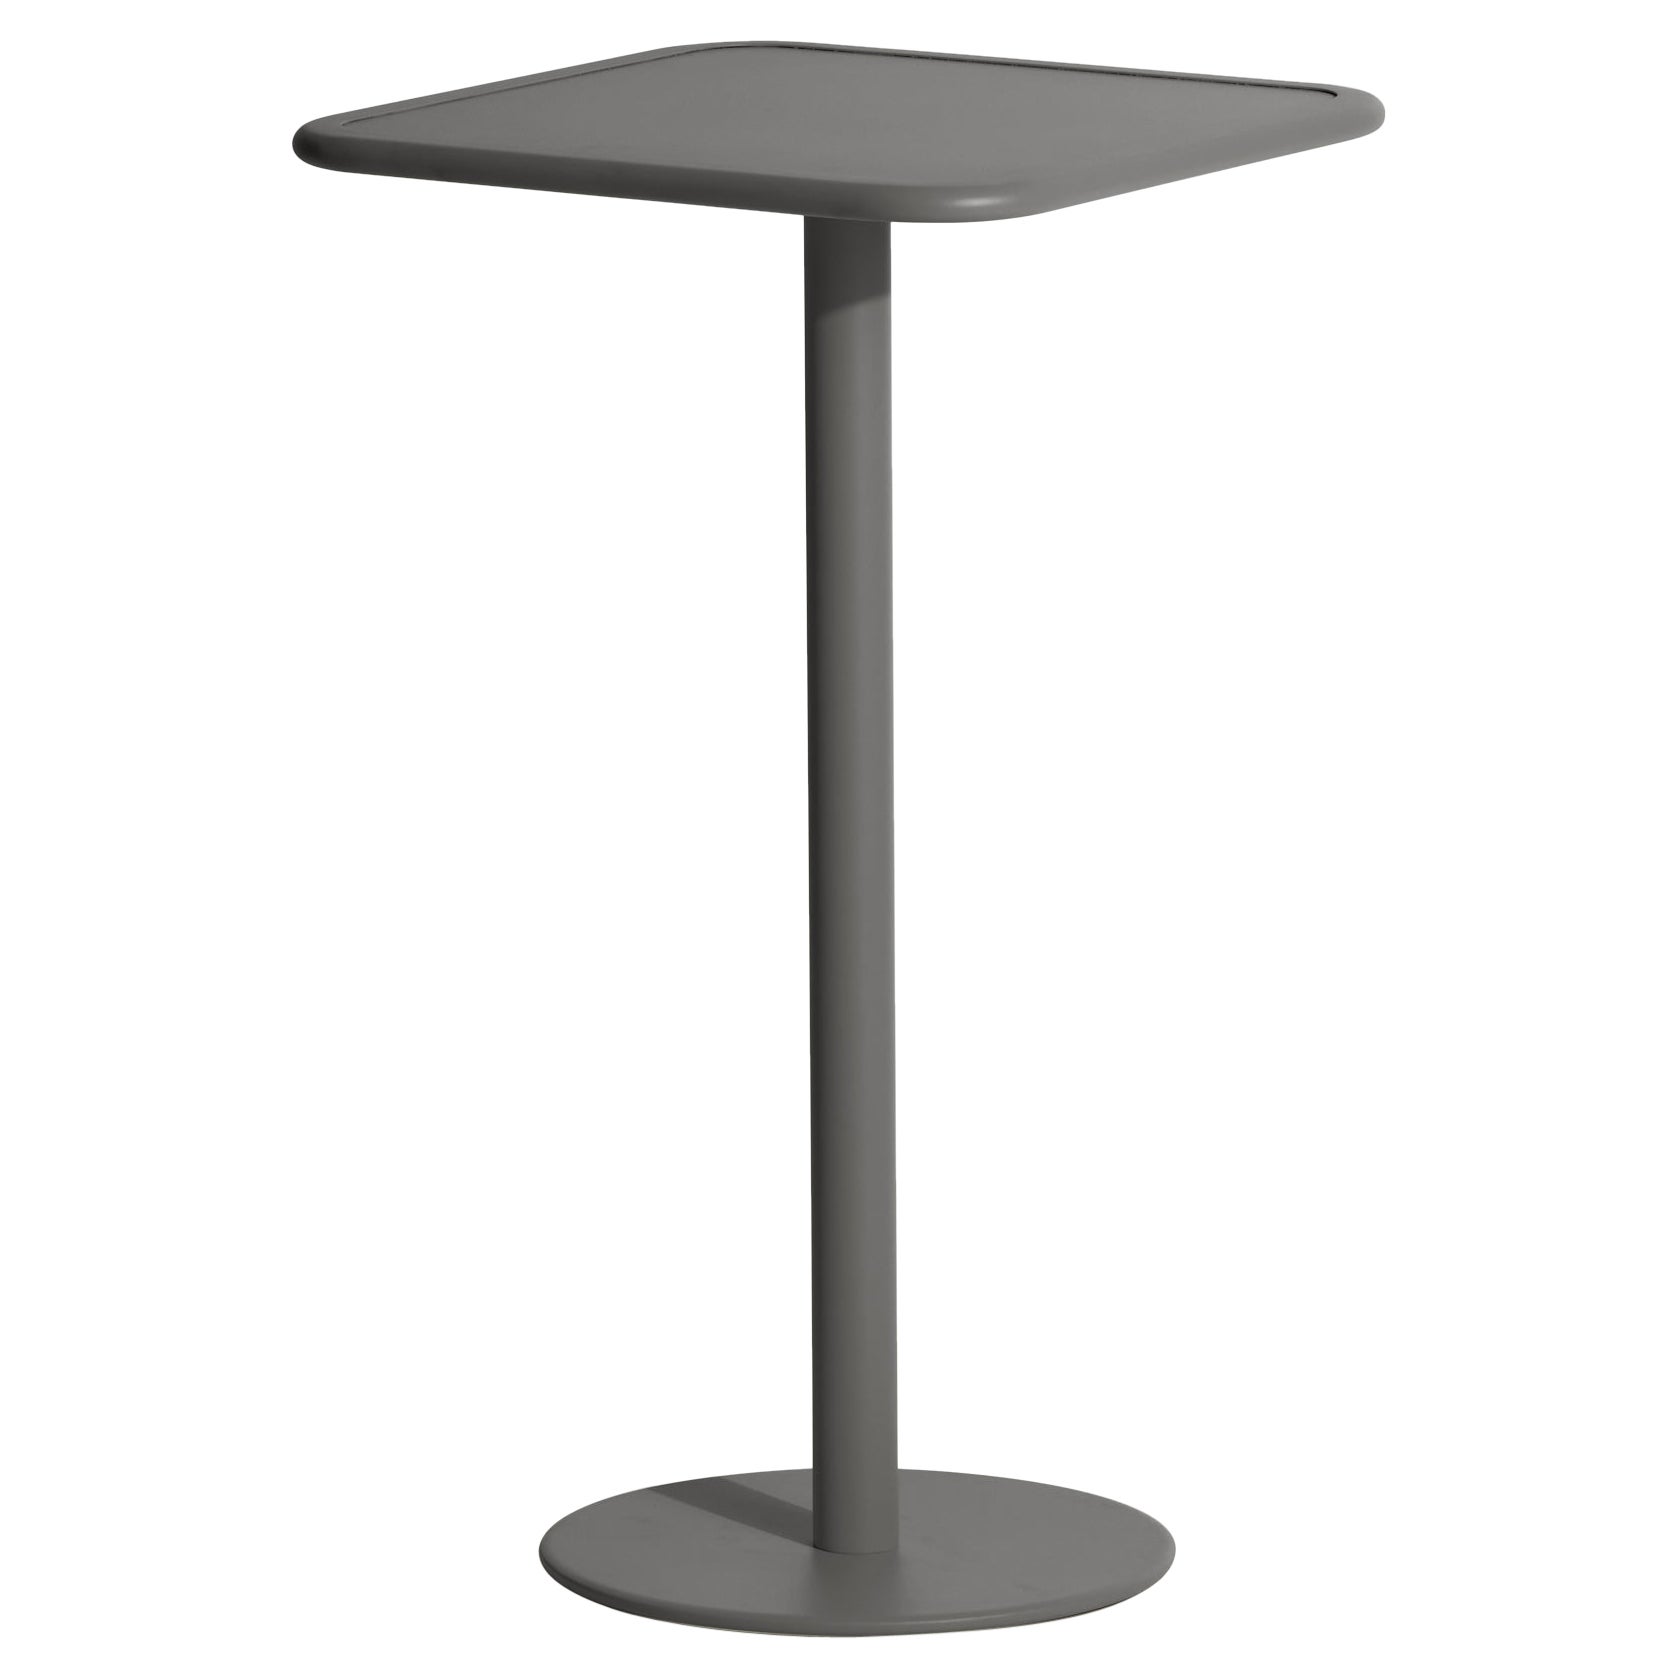 Petite Friture Week-End Square High Table in Anthracite Aluminium, 2017